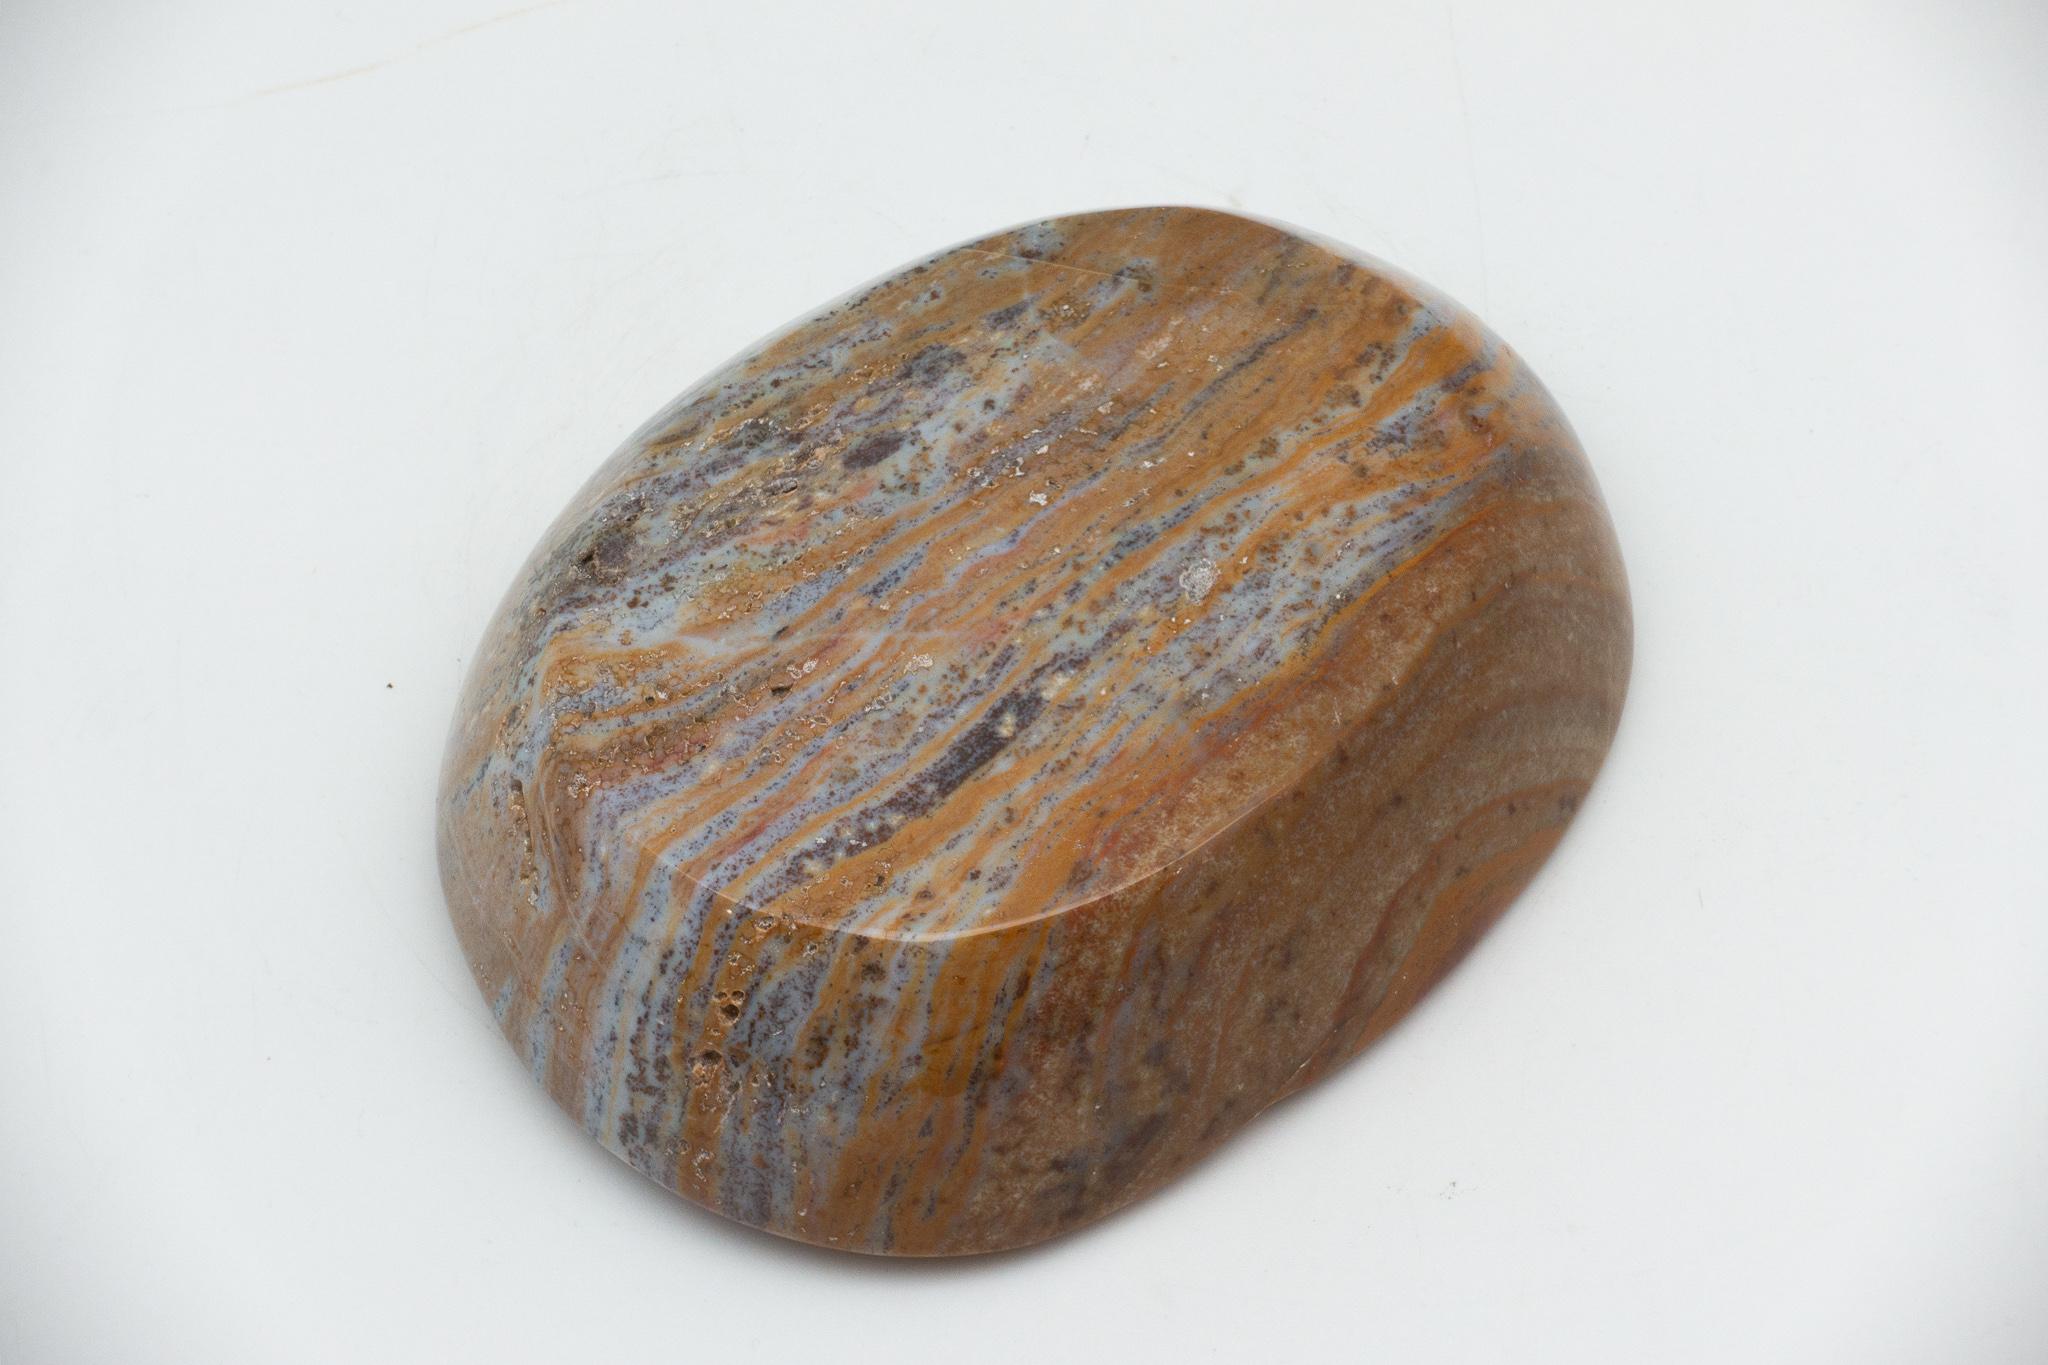 Hand carved jasper vide-poche or coin tray from Madagascar. The vide-poche (empty-pocket in French) is a small bowl or container kept in a convenient location to empty your pockets into when you walk through the door.